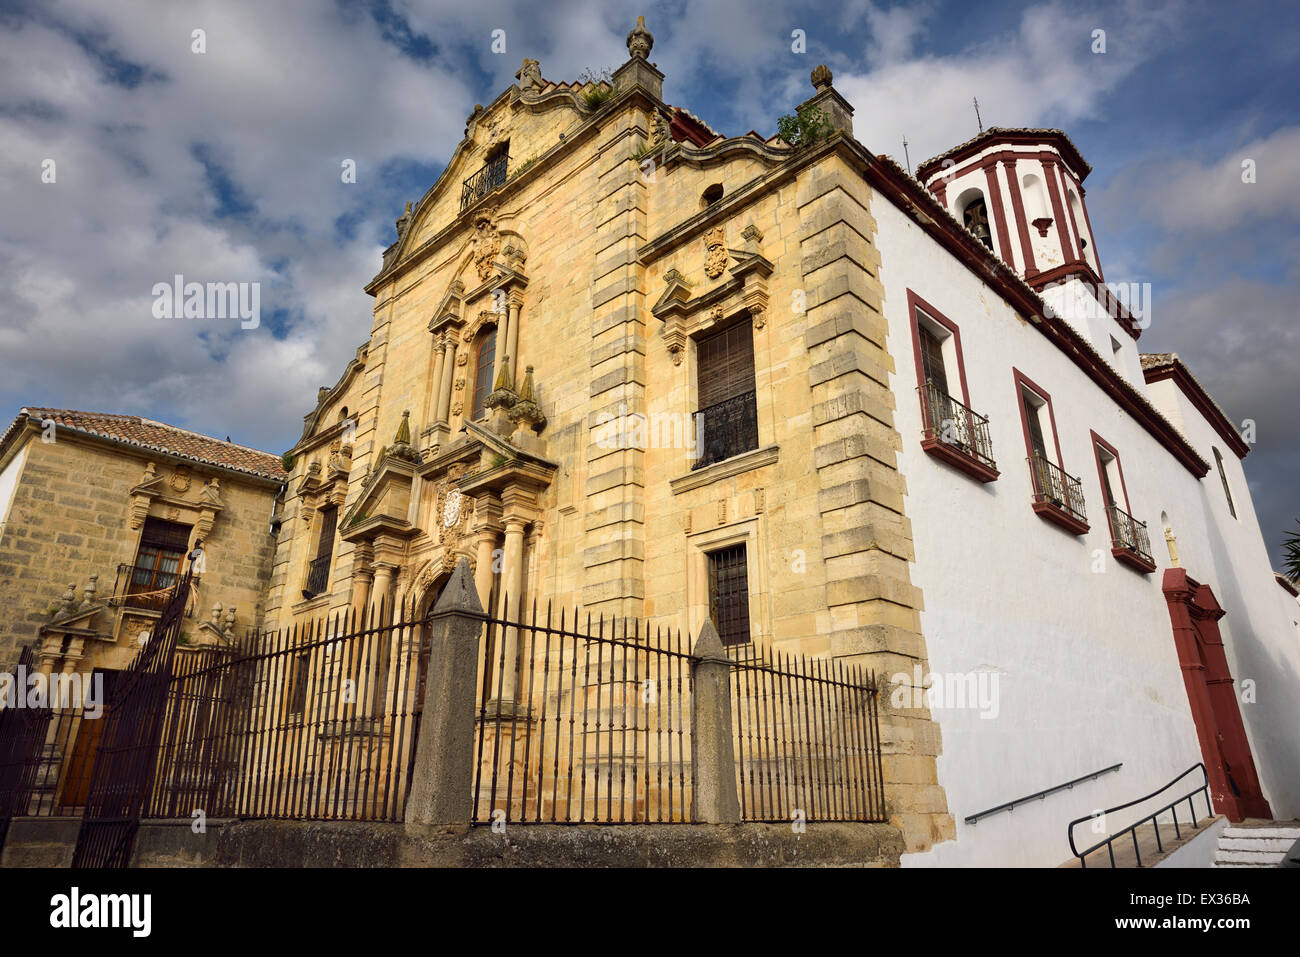 Baroque architecture and bell tower of Saint Cecilia Catholic Church in Ronda Spain Stock Photo